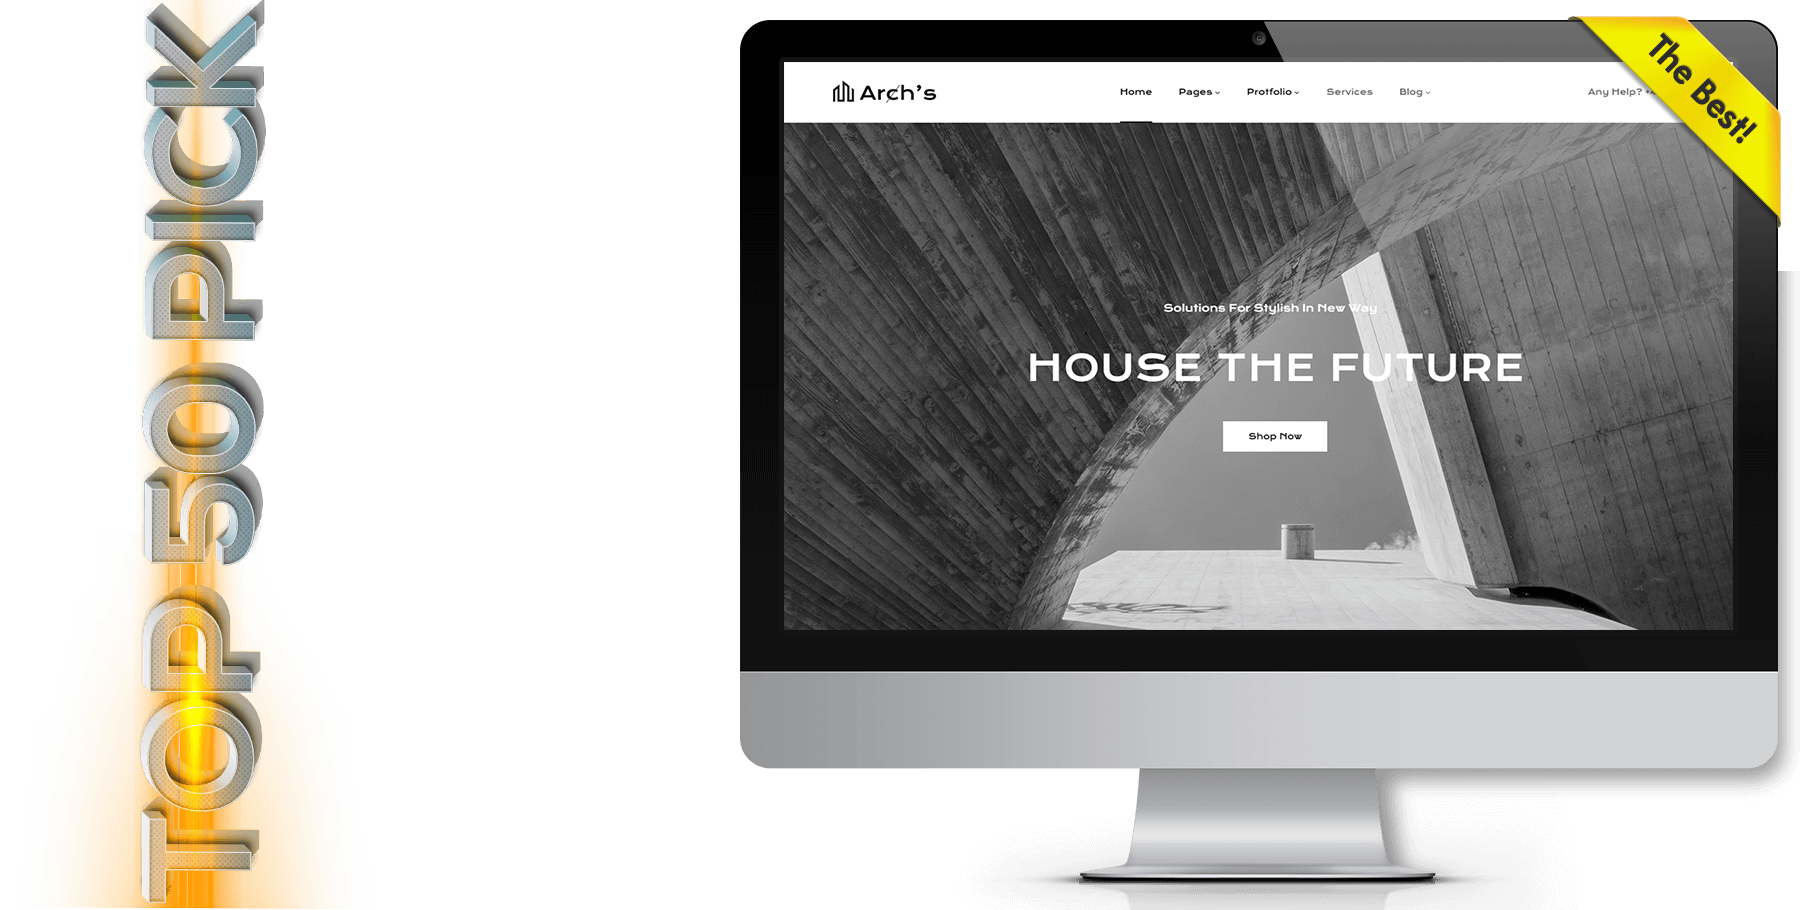 A website design in construction named Archs